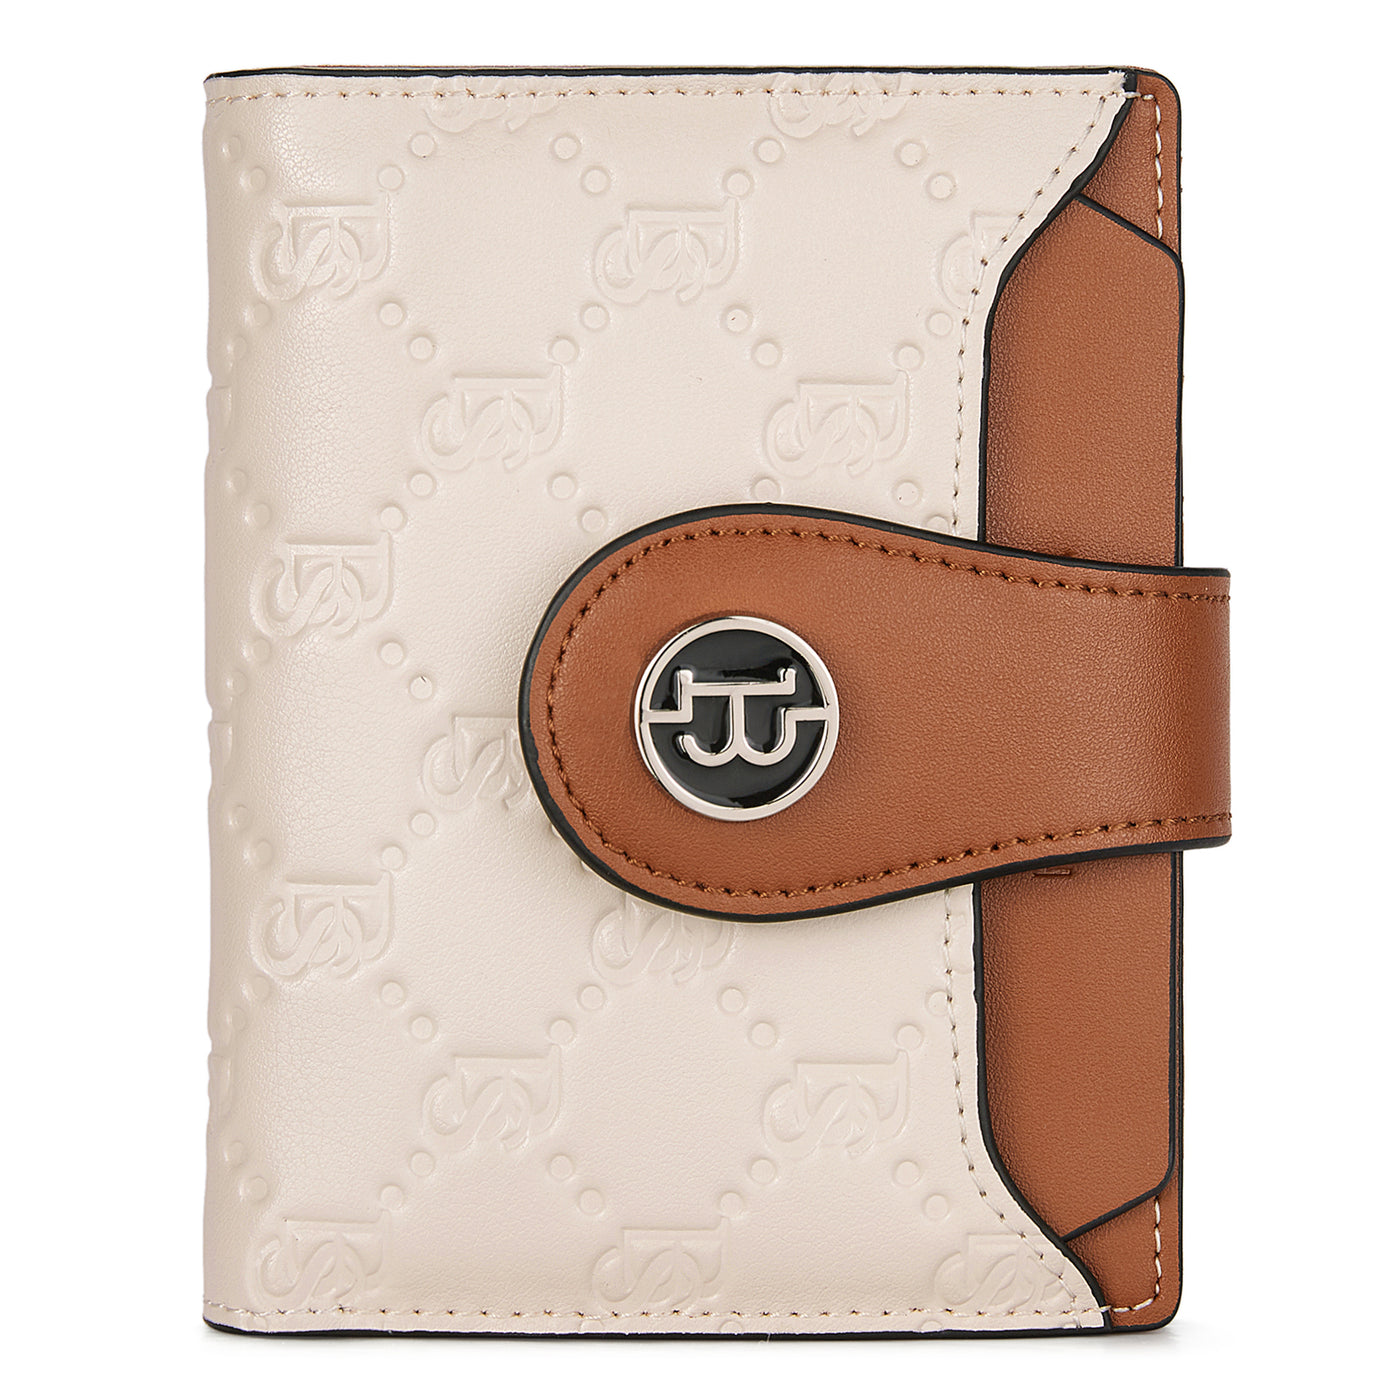 Lnna Hand Tooled Leather Wallet - Genuine Leather